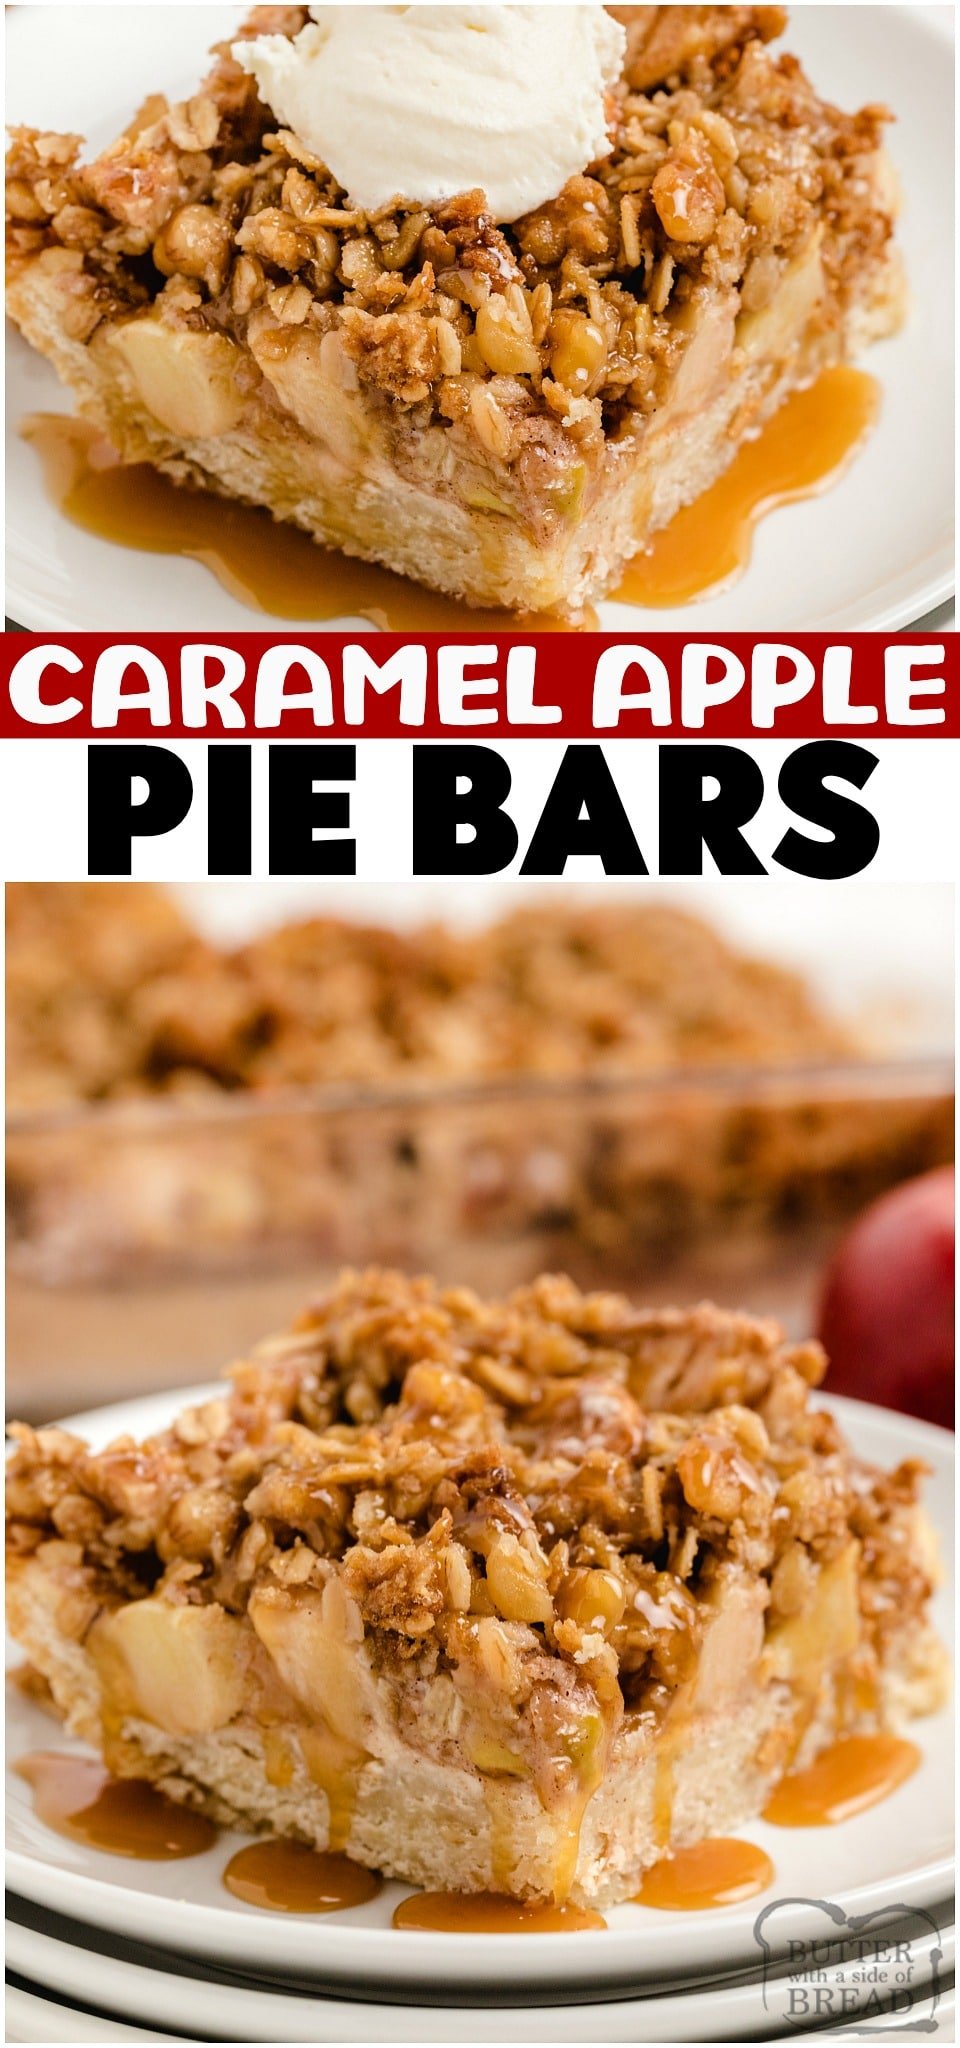 Apple Pie Bars topped with a buttery crumble & drizzled with caramel for a fantastic take on a classic apple pie! Perfect baked apples recipe for a no-fuss alternative to apple pie. Apple pie bars are easier to make, simple to serve and everyone loves them! #applepie #apples #pie #dessert #caramelapple #slabpie #baking #recipe from BUTTER WITH A SIDE OF BREAD